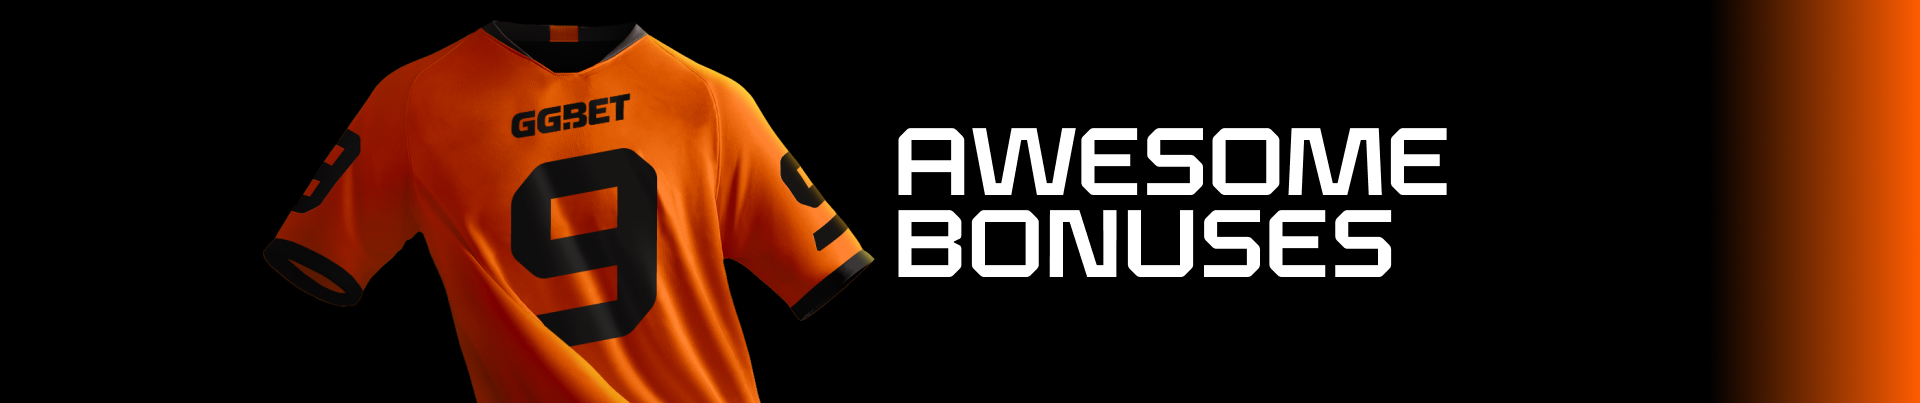 Do not miss your bonuses!